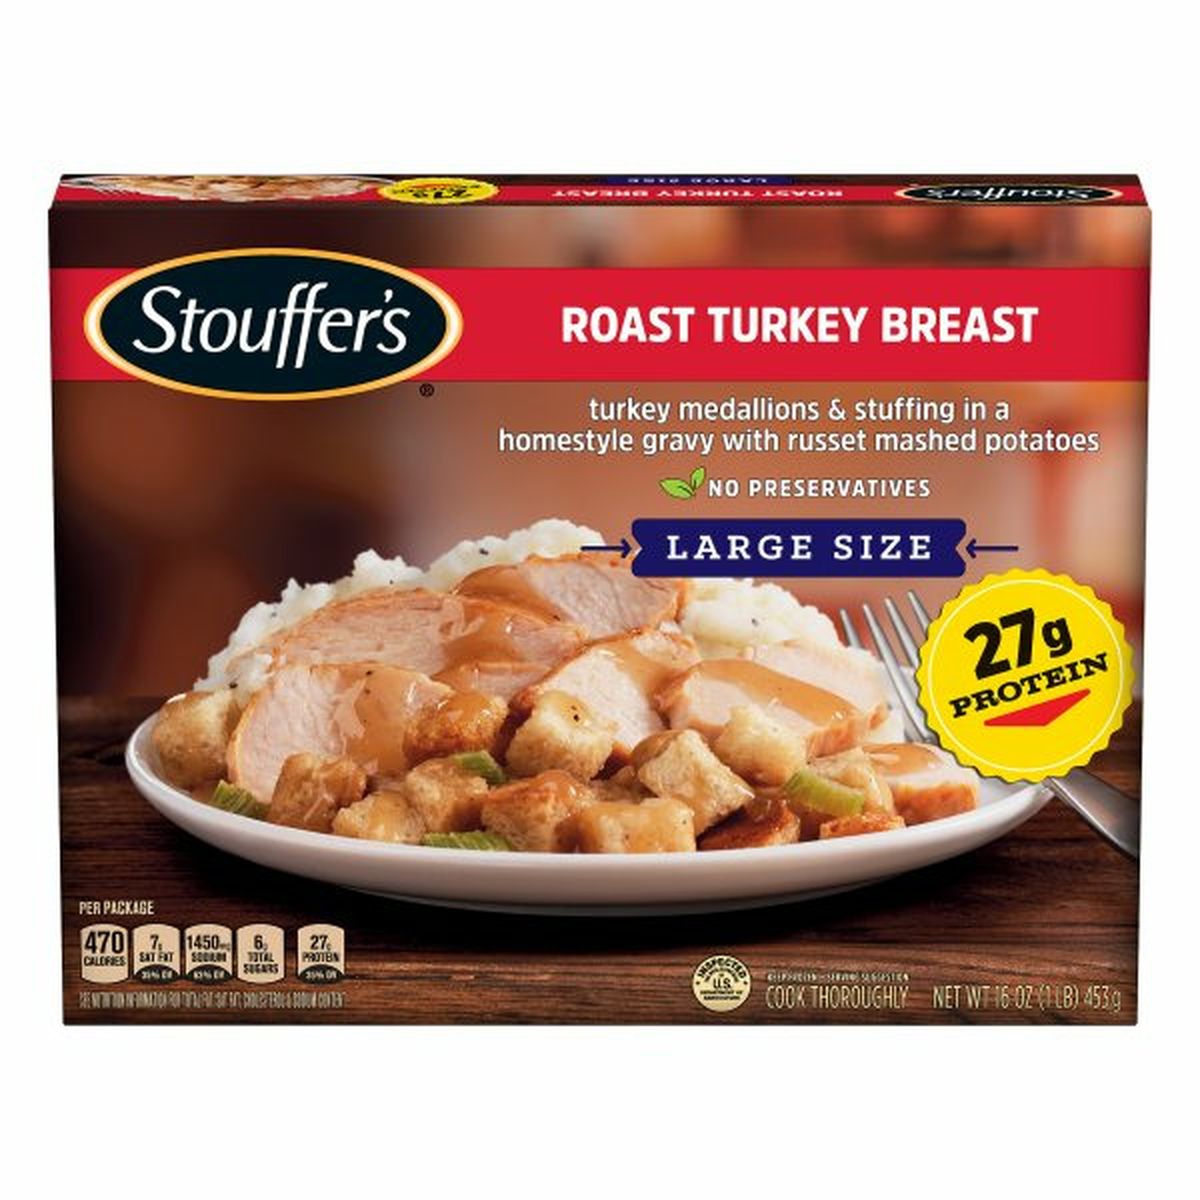 Calories in Stouffer's Roast Turkey Breast, Large Size